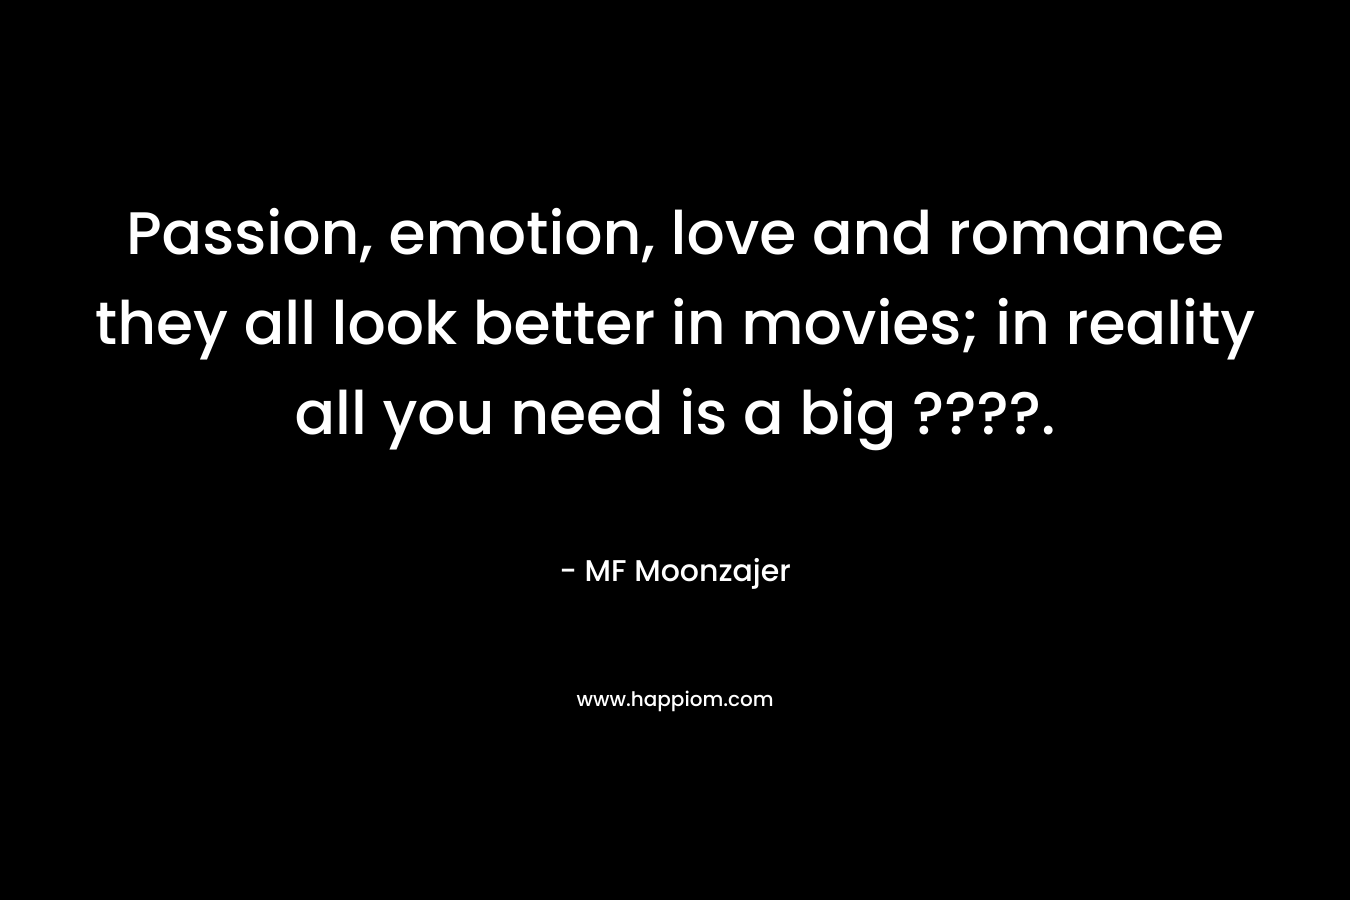 Passion, emotion, love and romance they all look better in movies; in reality all you need is a big ????. – MF Moonzajer